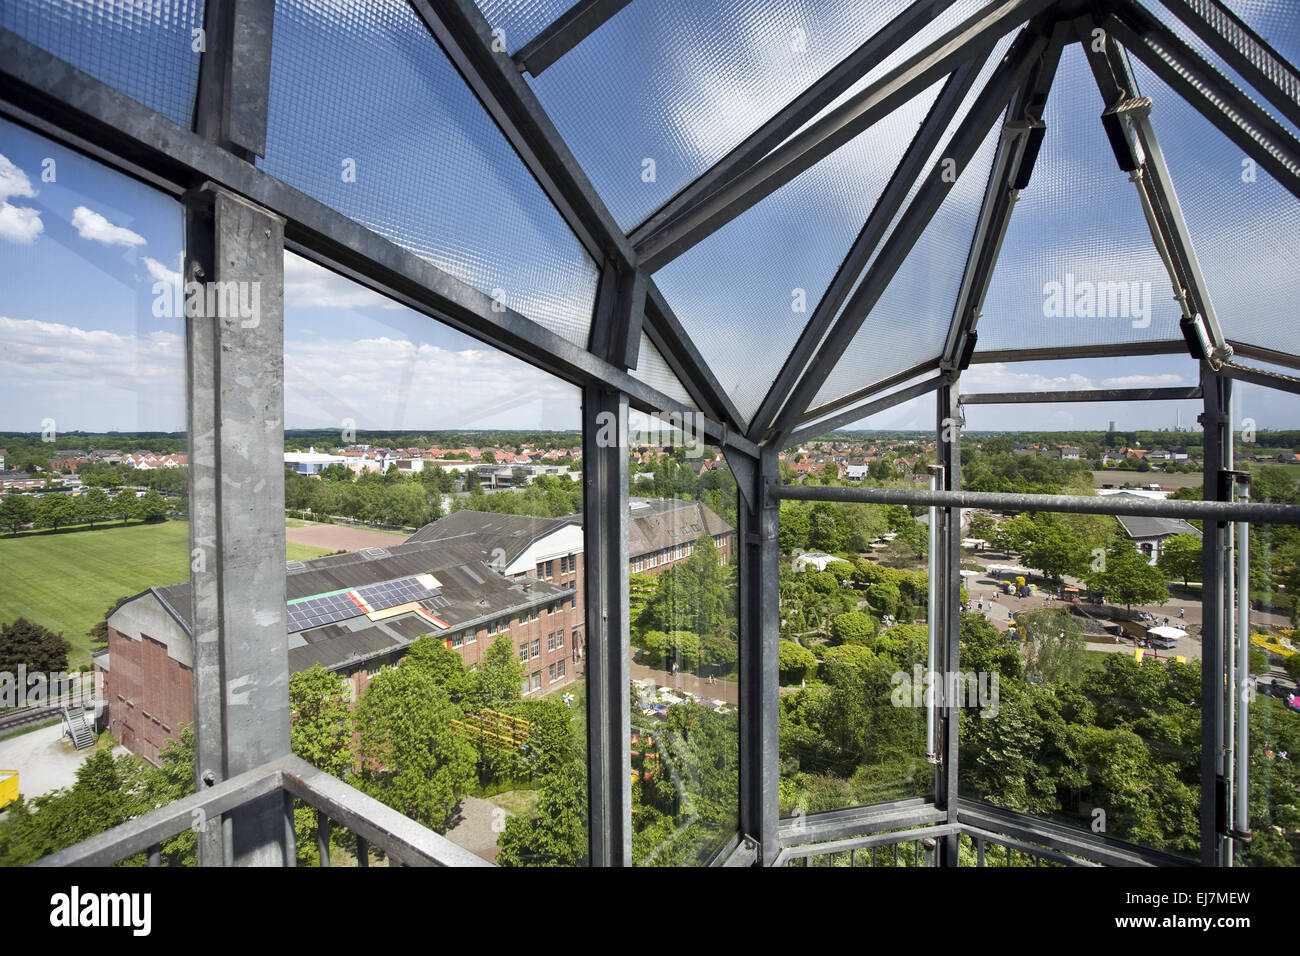 View from the glass elephant, Hamm, Germany Stock Photo